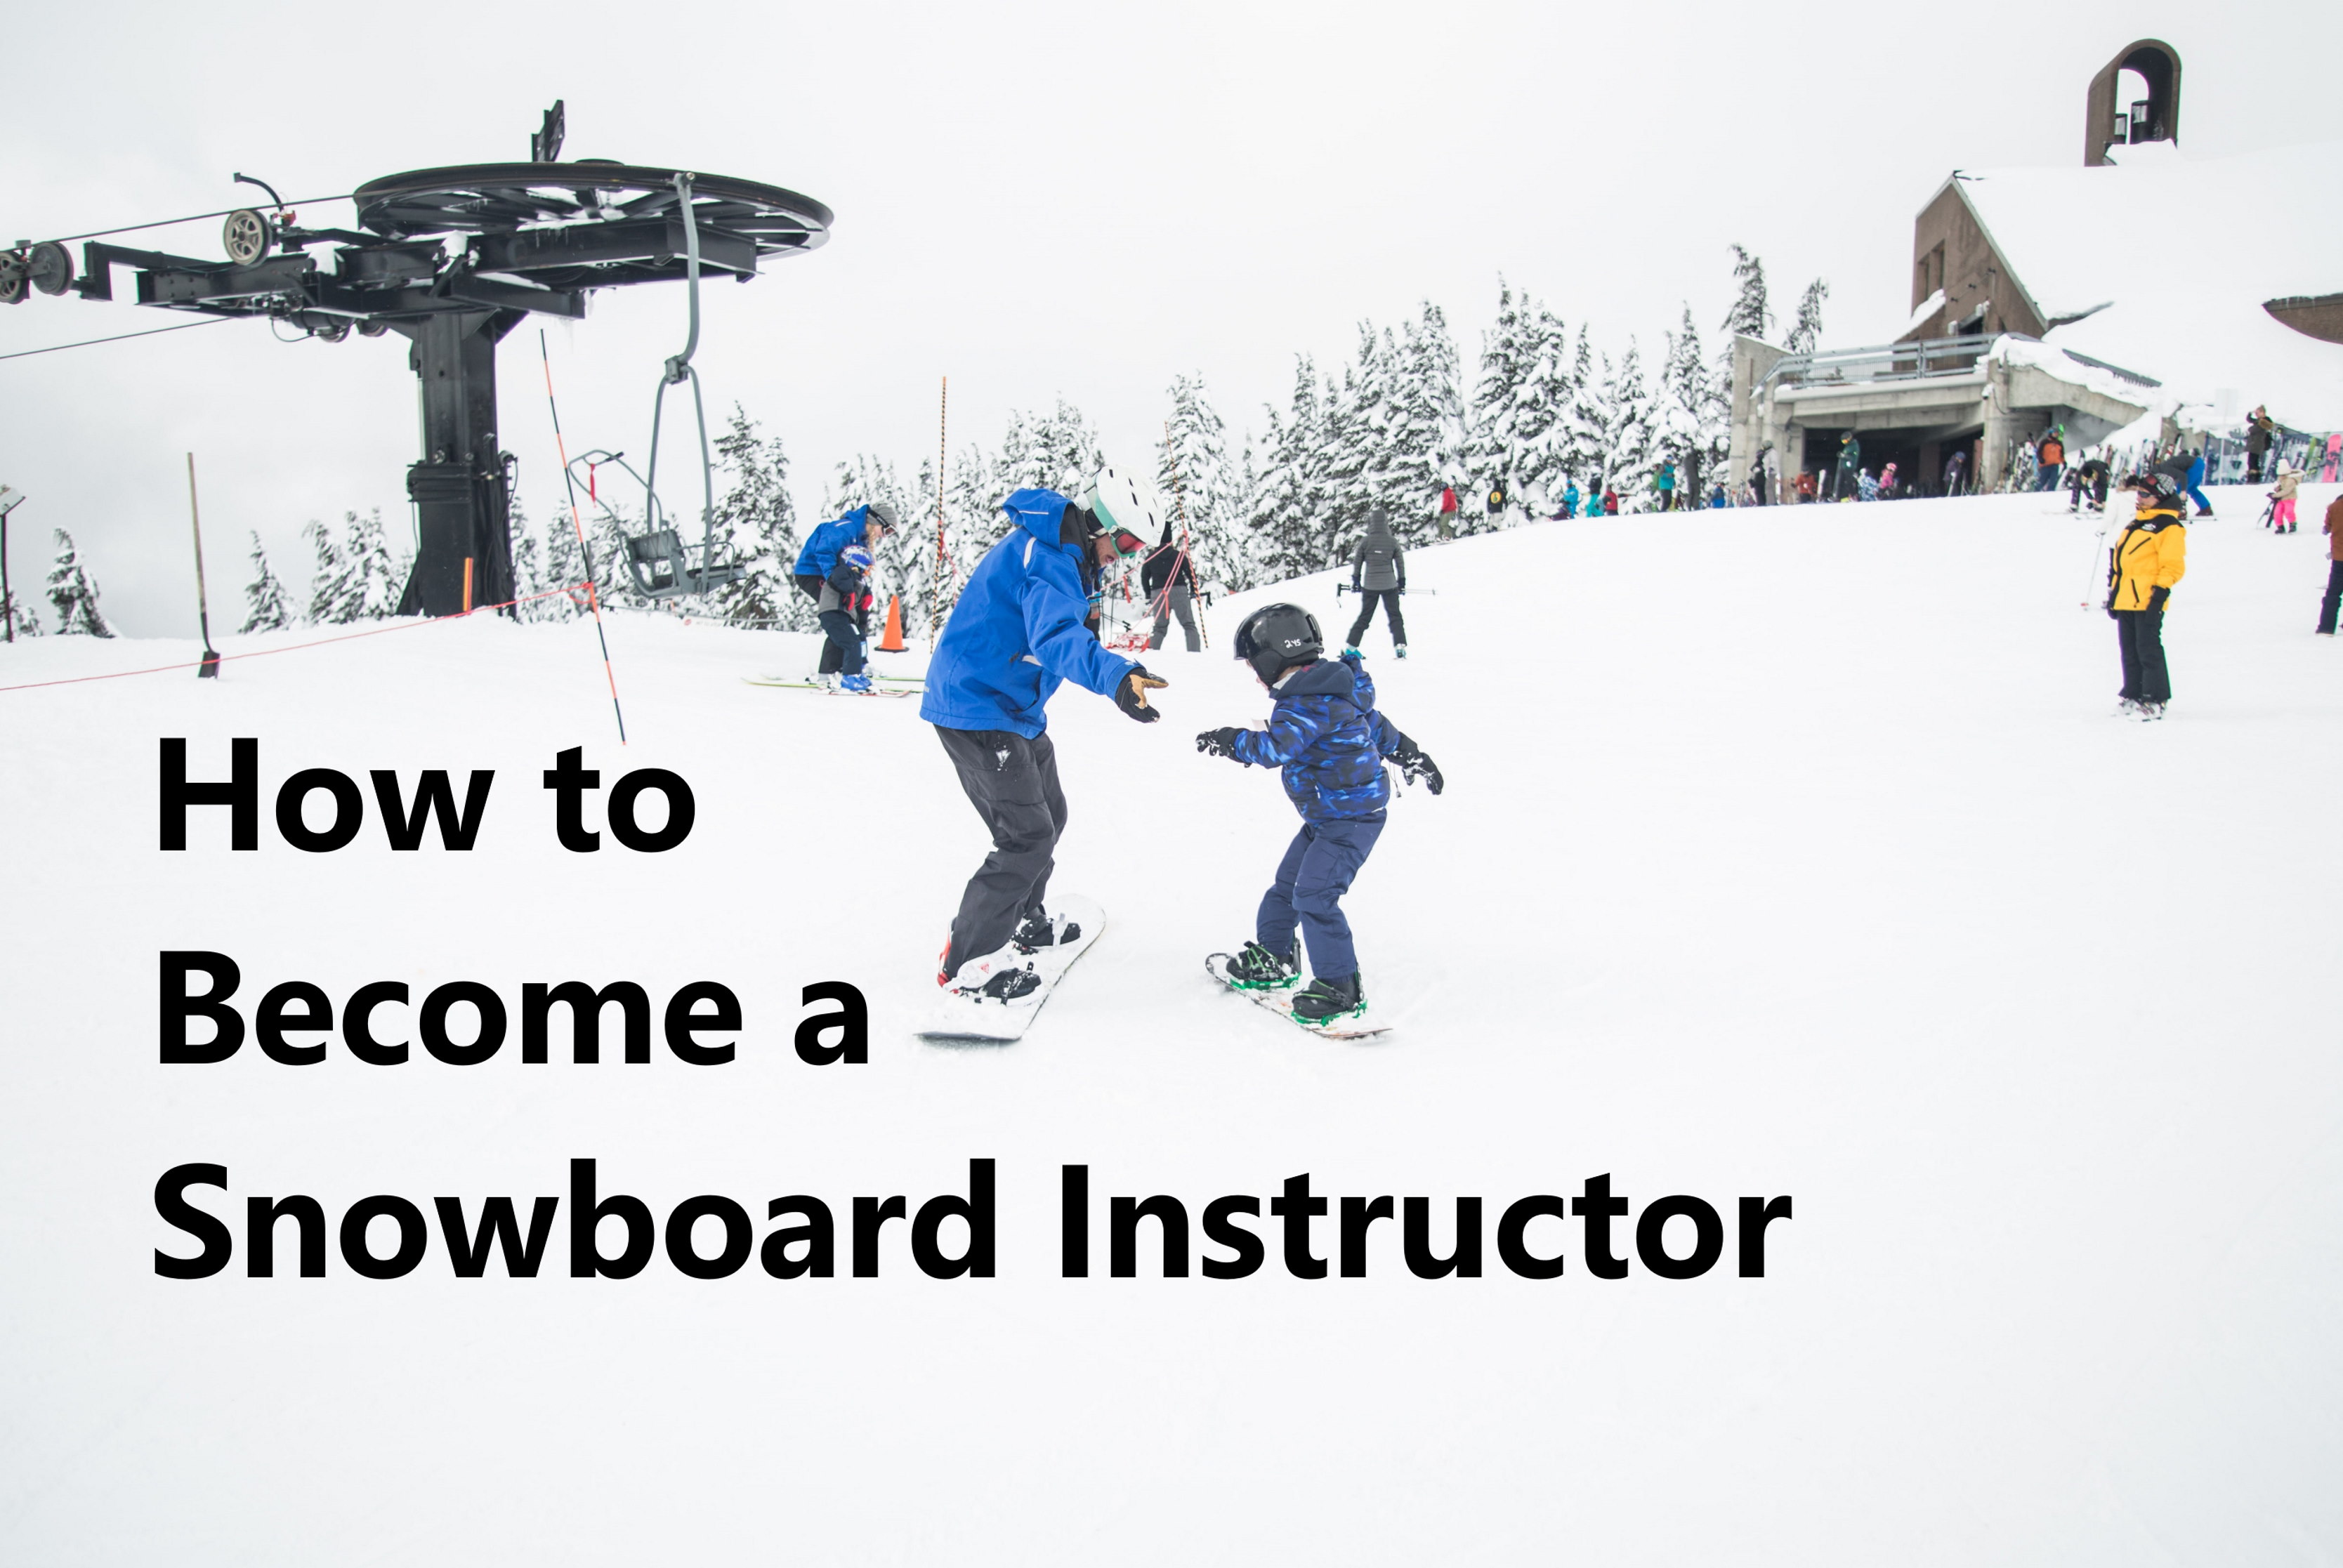 Five Reasons to Become a Snowboard Instructor